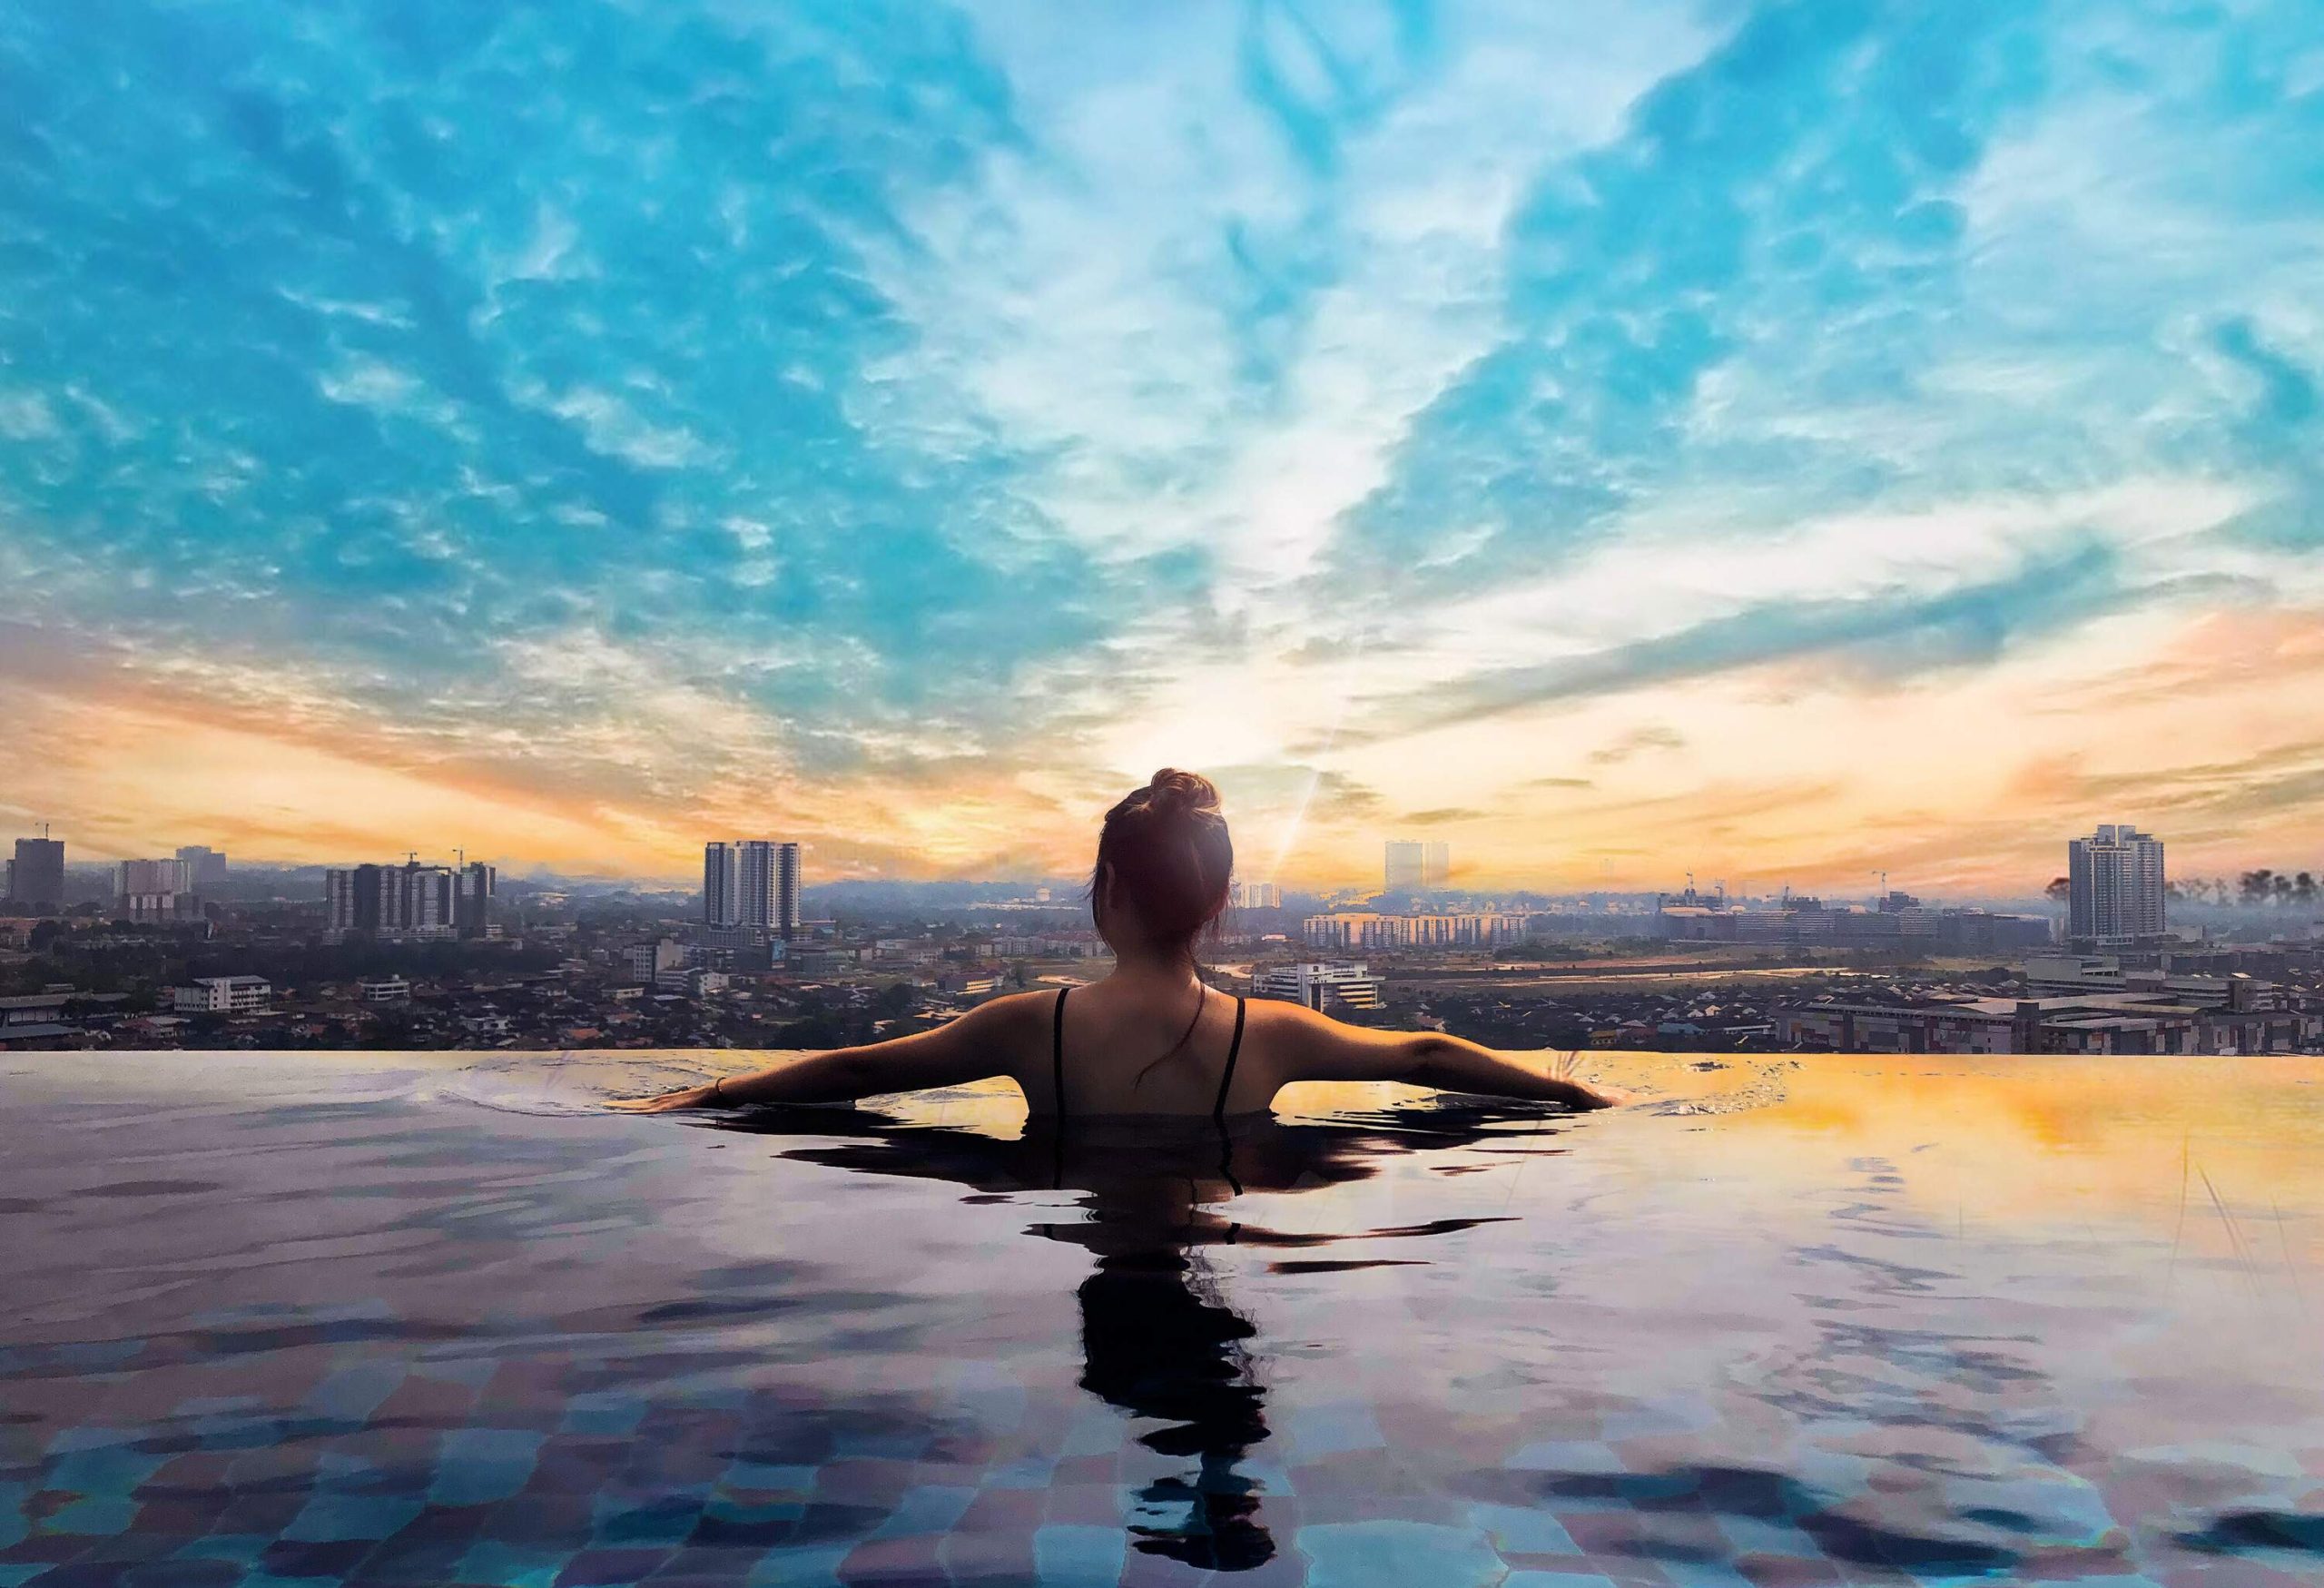 A rear view of a woman at the edge of an infinity pool with a cityscape view against the dramatic sky.